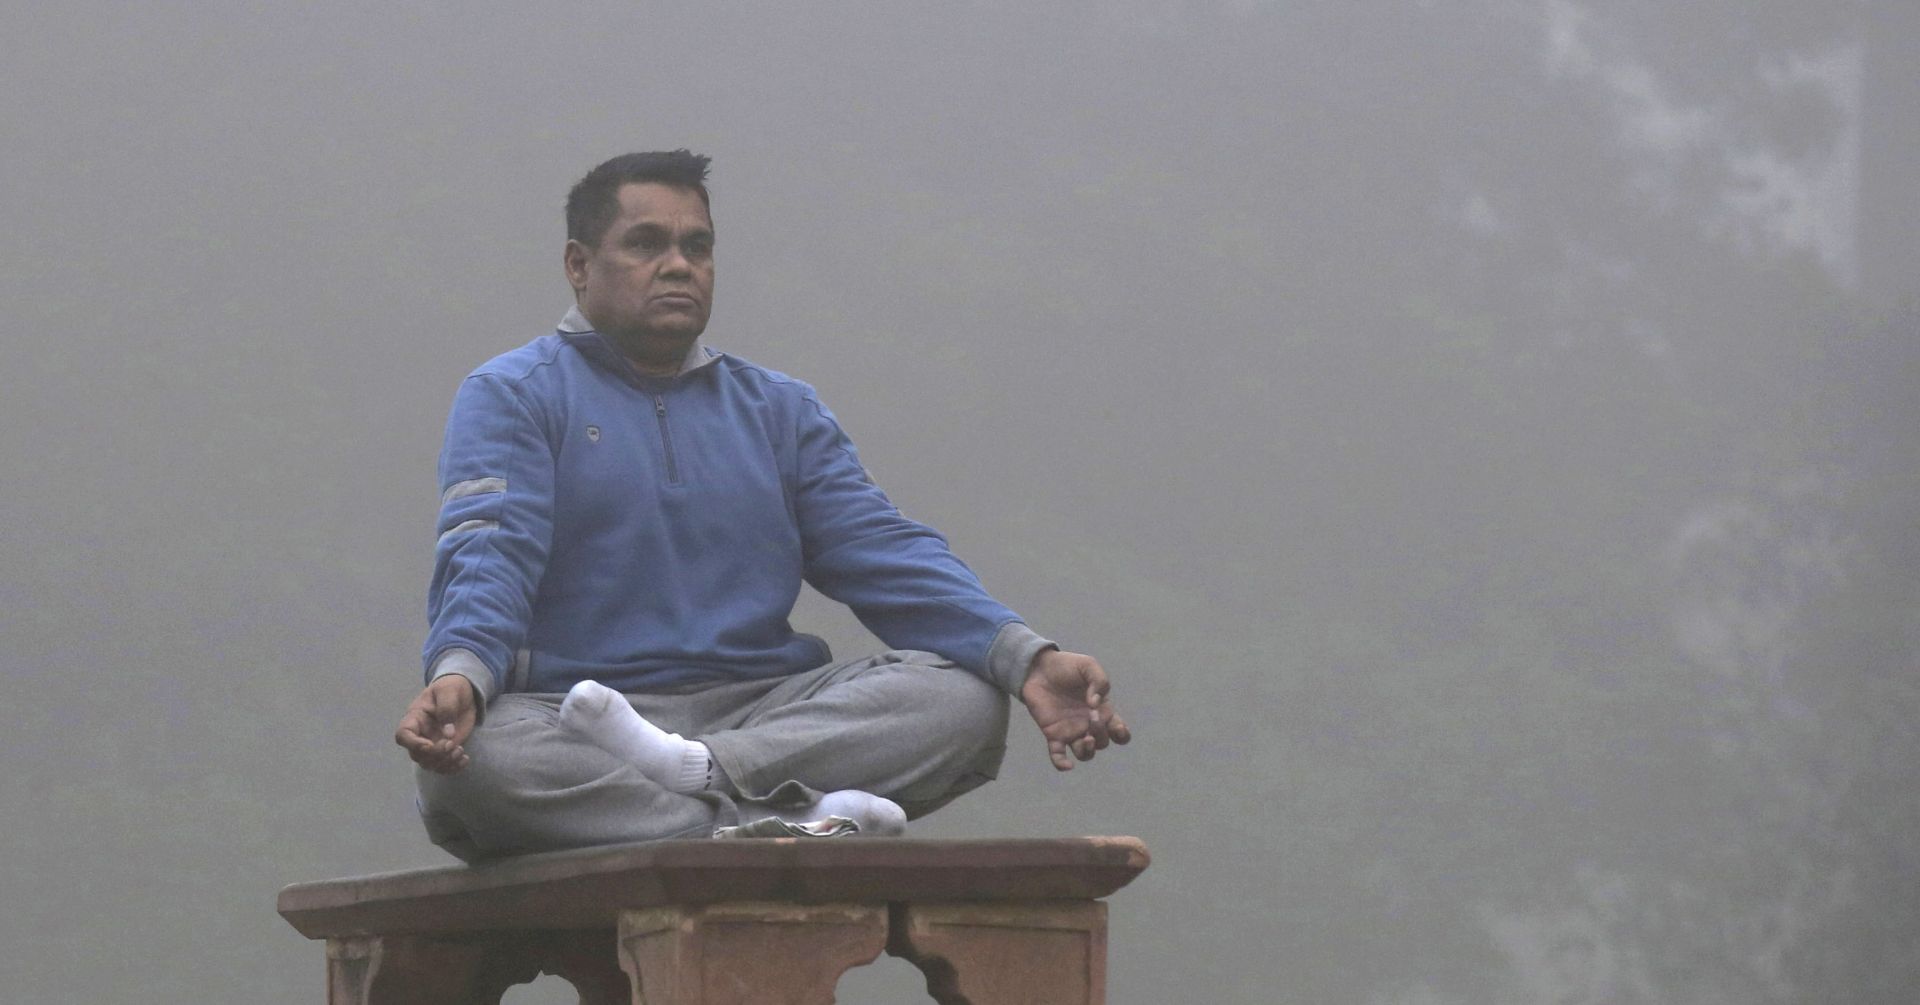 epa06314939 An Indian man meditates as the Lodhi garden is engulfed in heavy smog during early morning in New Delhi, India, 08 November 2017. People in the Indian capital city are struggling with heavily polluted air as air quality hit 'severe levels,' according to reports.  EPA/RAJAT GUPTA